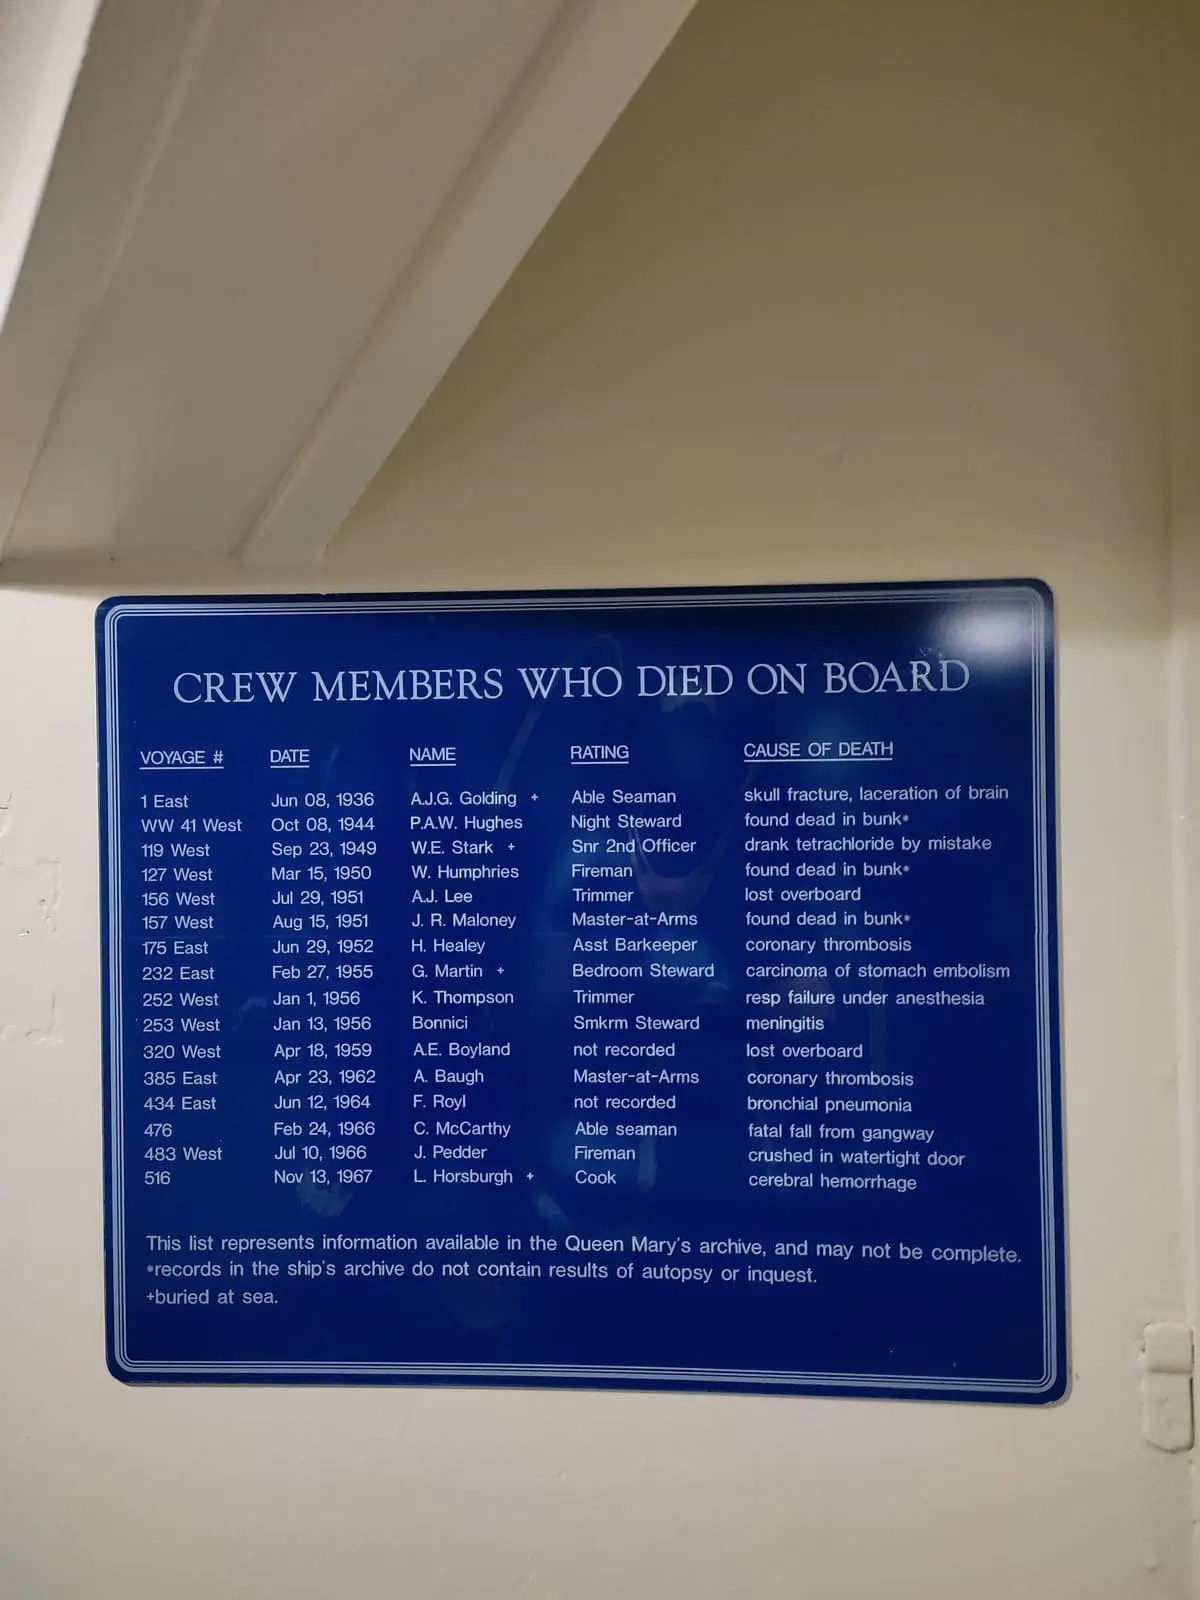 Sign that lists crew members who died on board of Queen Mary and their cause of death